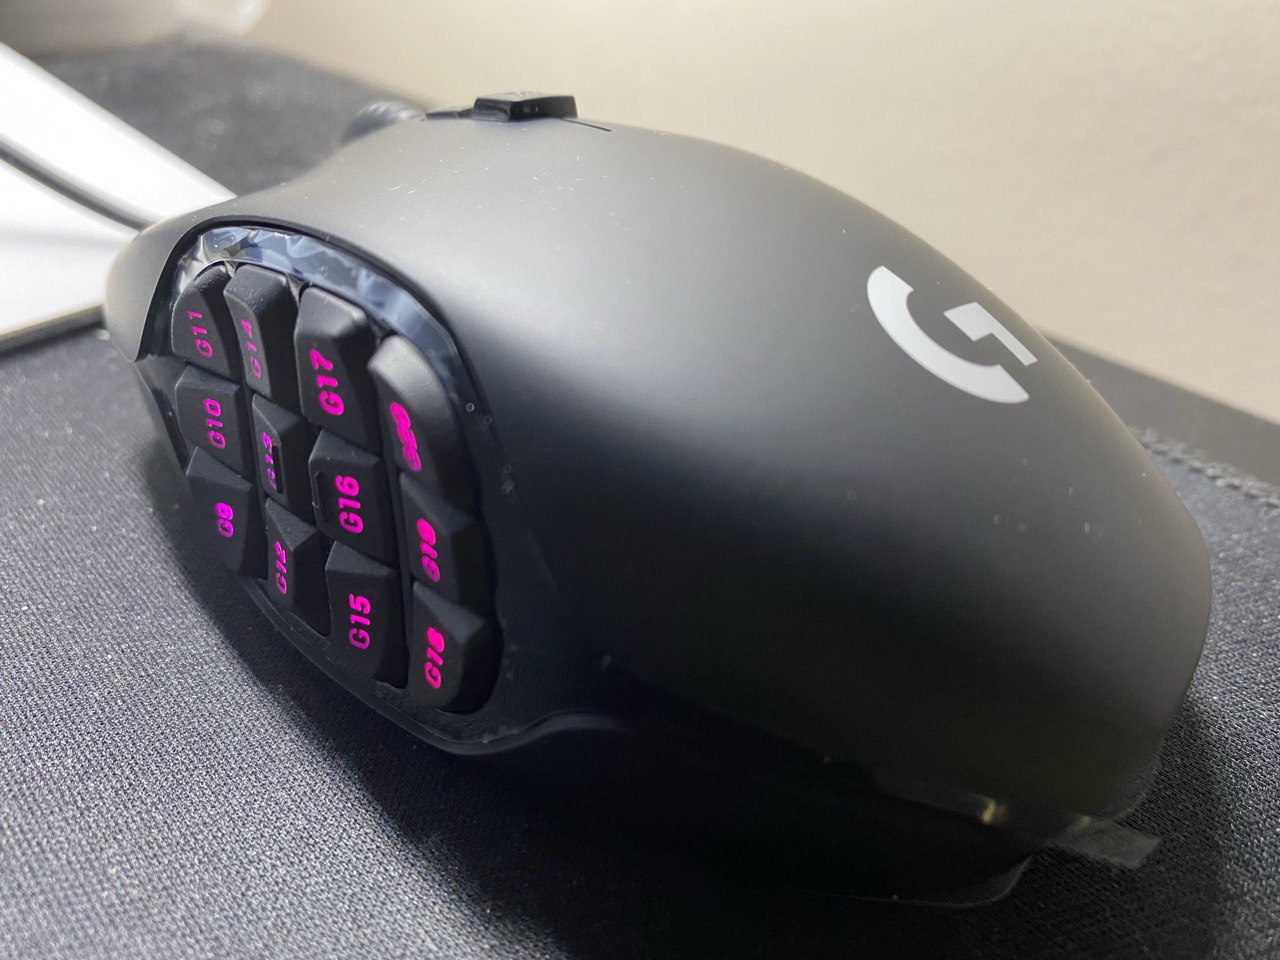 Logitech G600 MMO Gaming Mouse Review – Pros and Cons